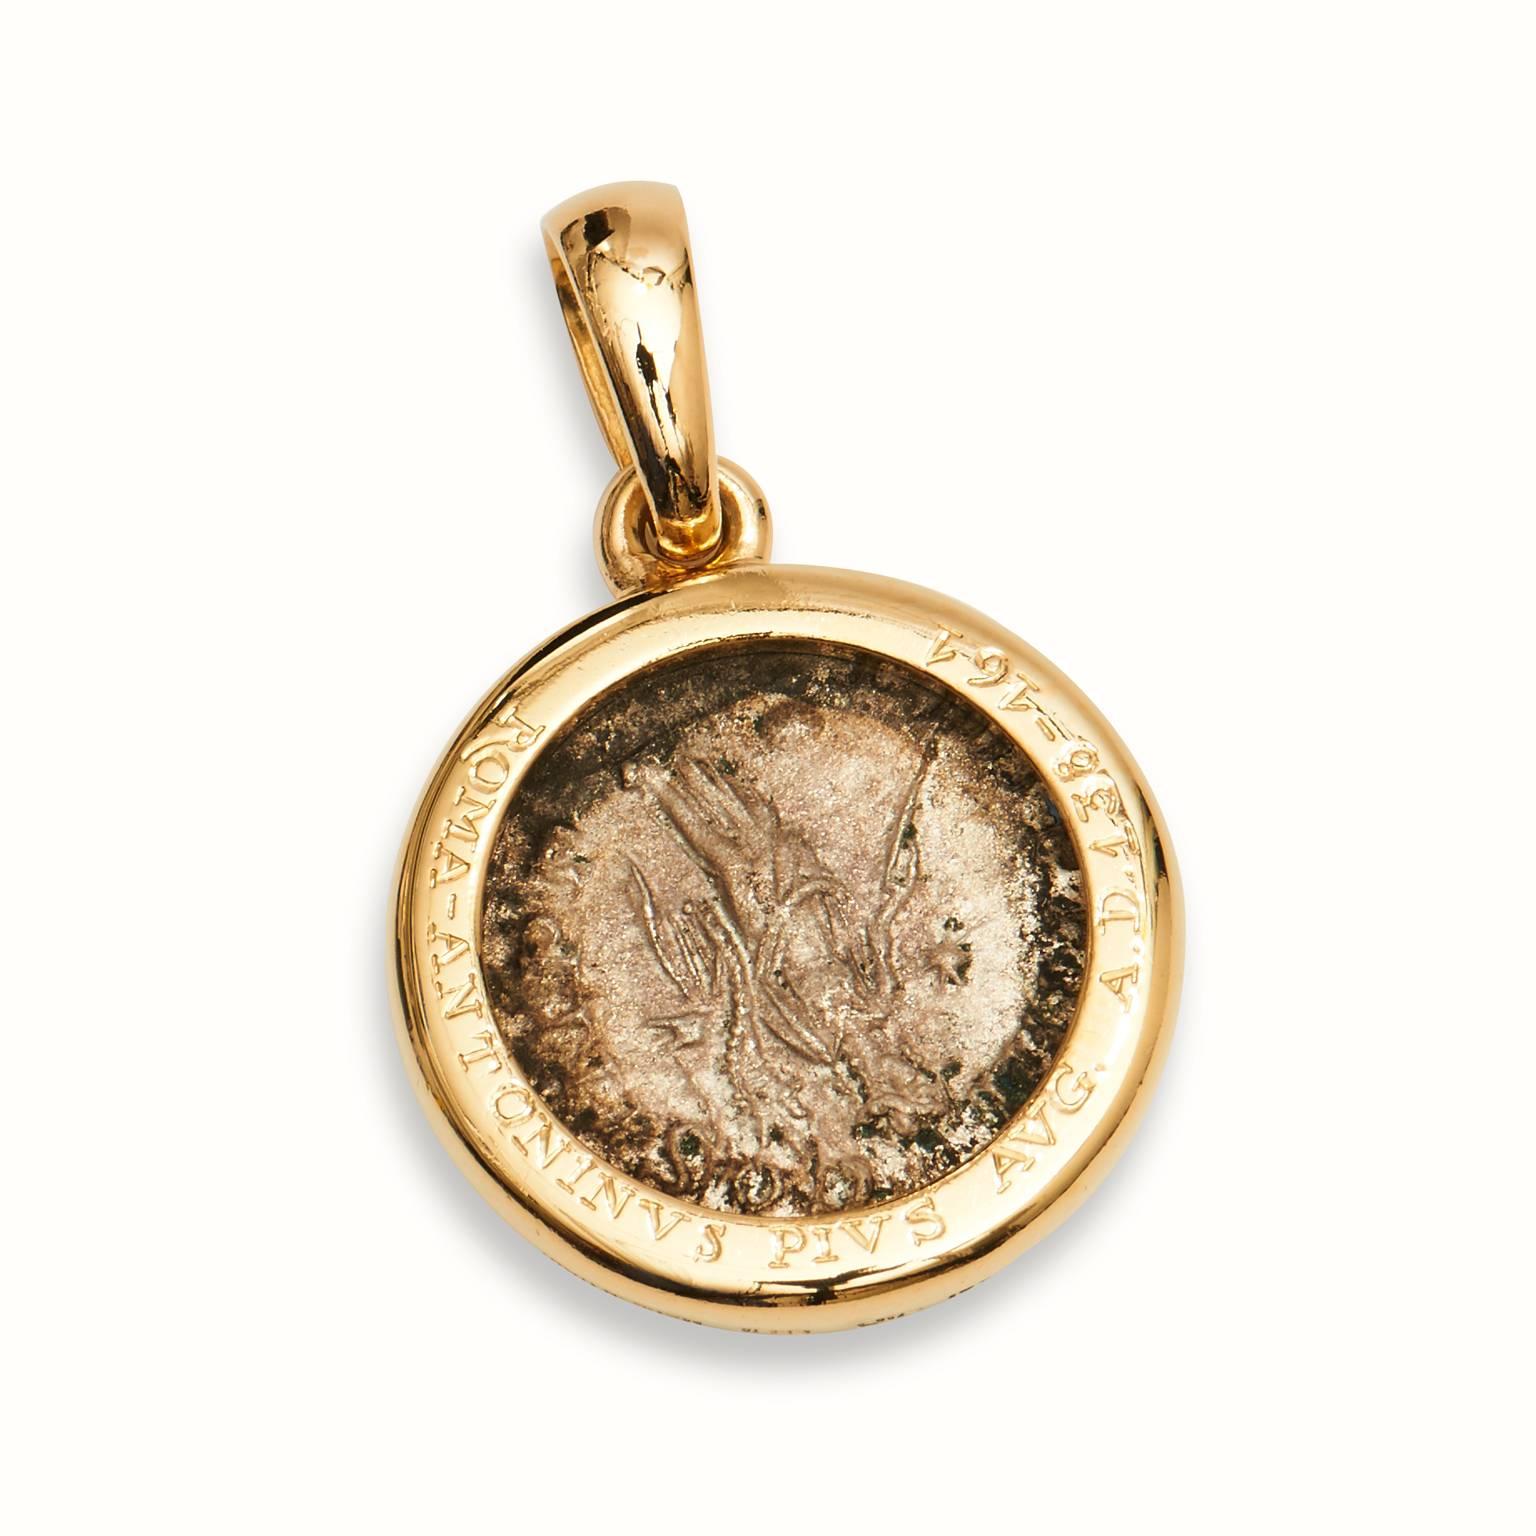 This Bvlgari coin pendant is crafted in 18kt yellow gold. New list retail price is $3,600. Our price $2,400